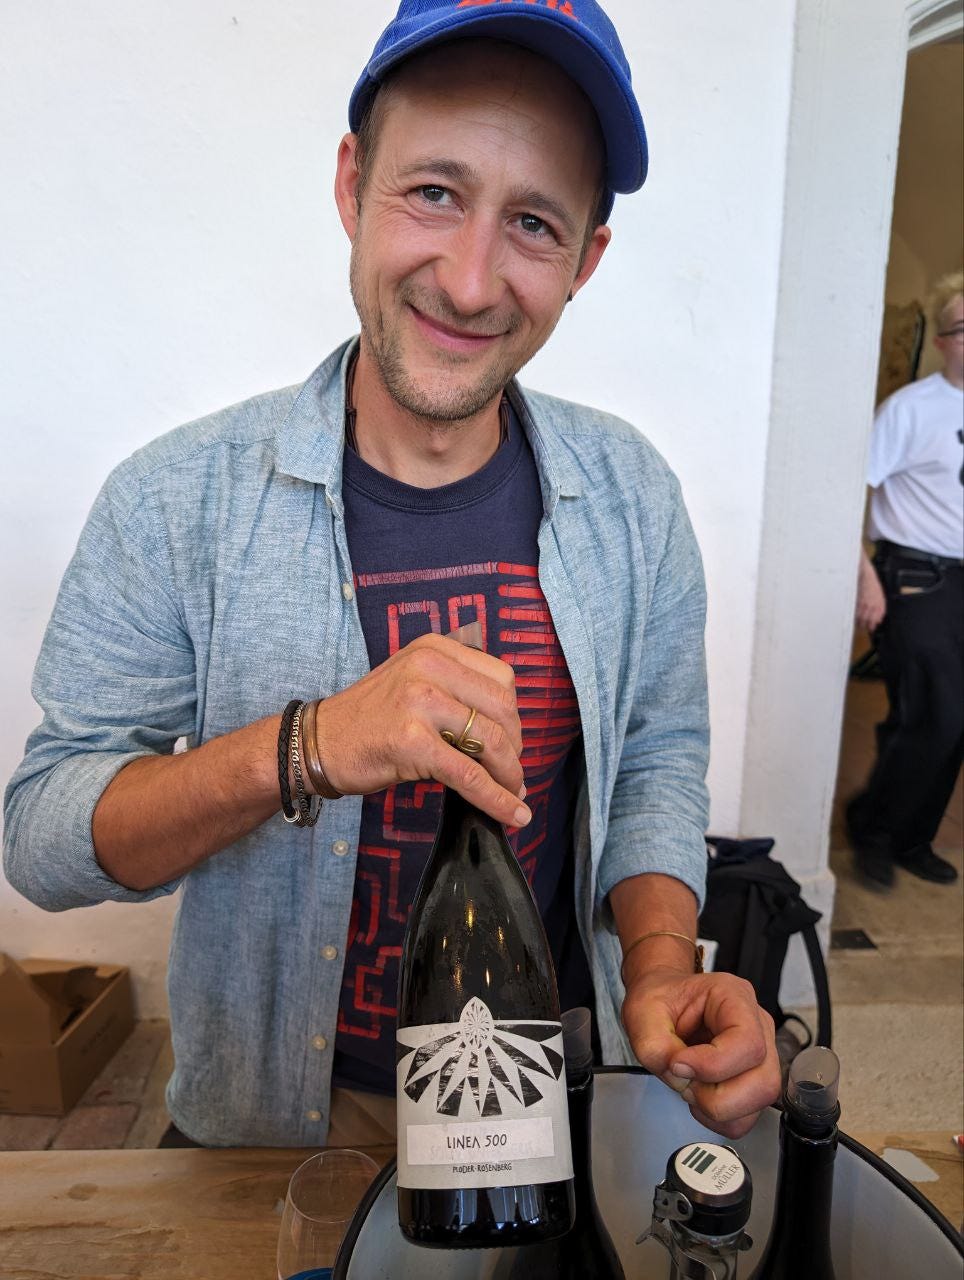 Manuel Ploder at this year's Karakterre wine fair, with one of the wines he was forced to relabel